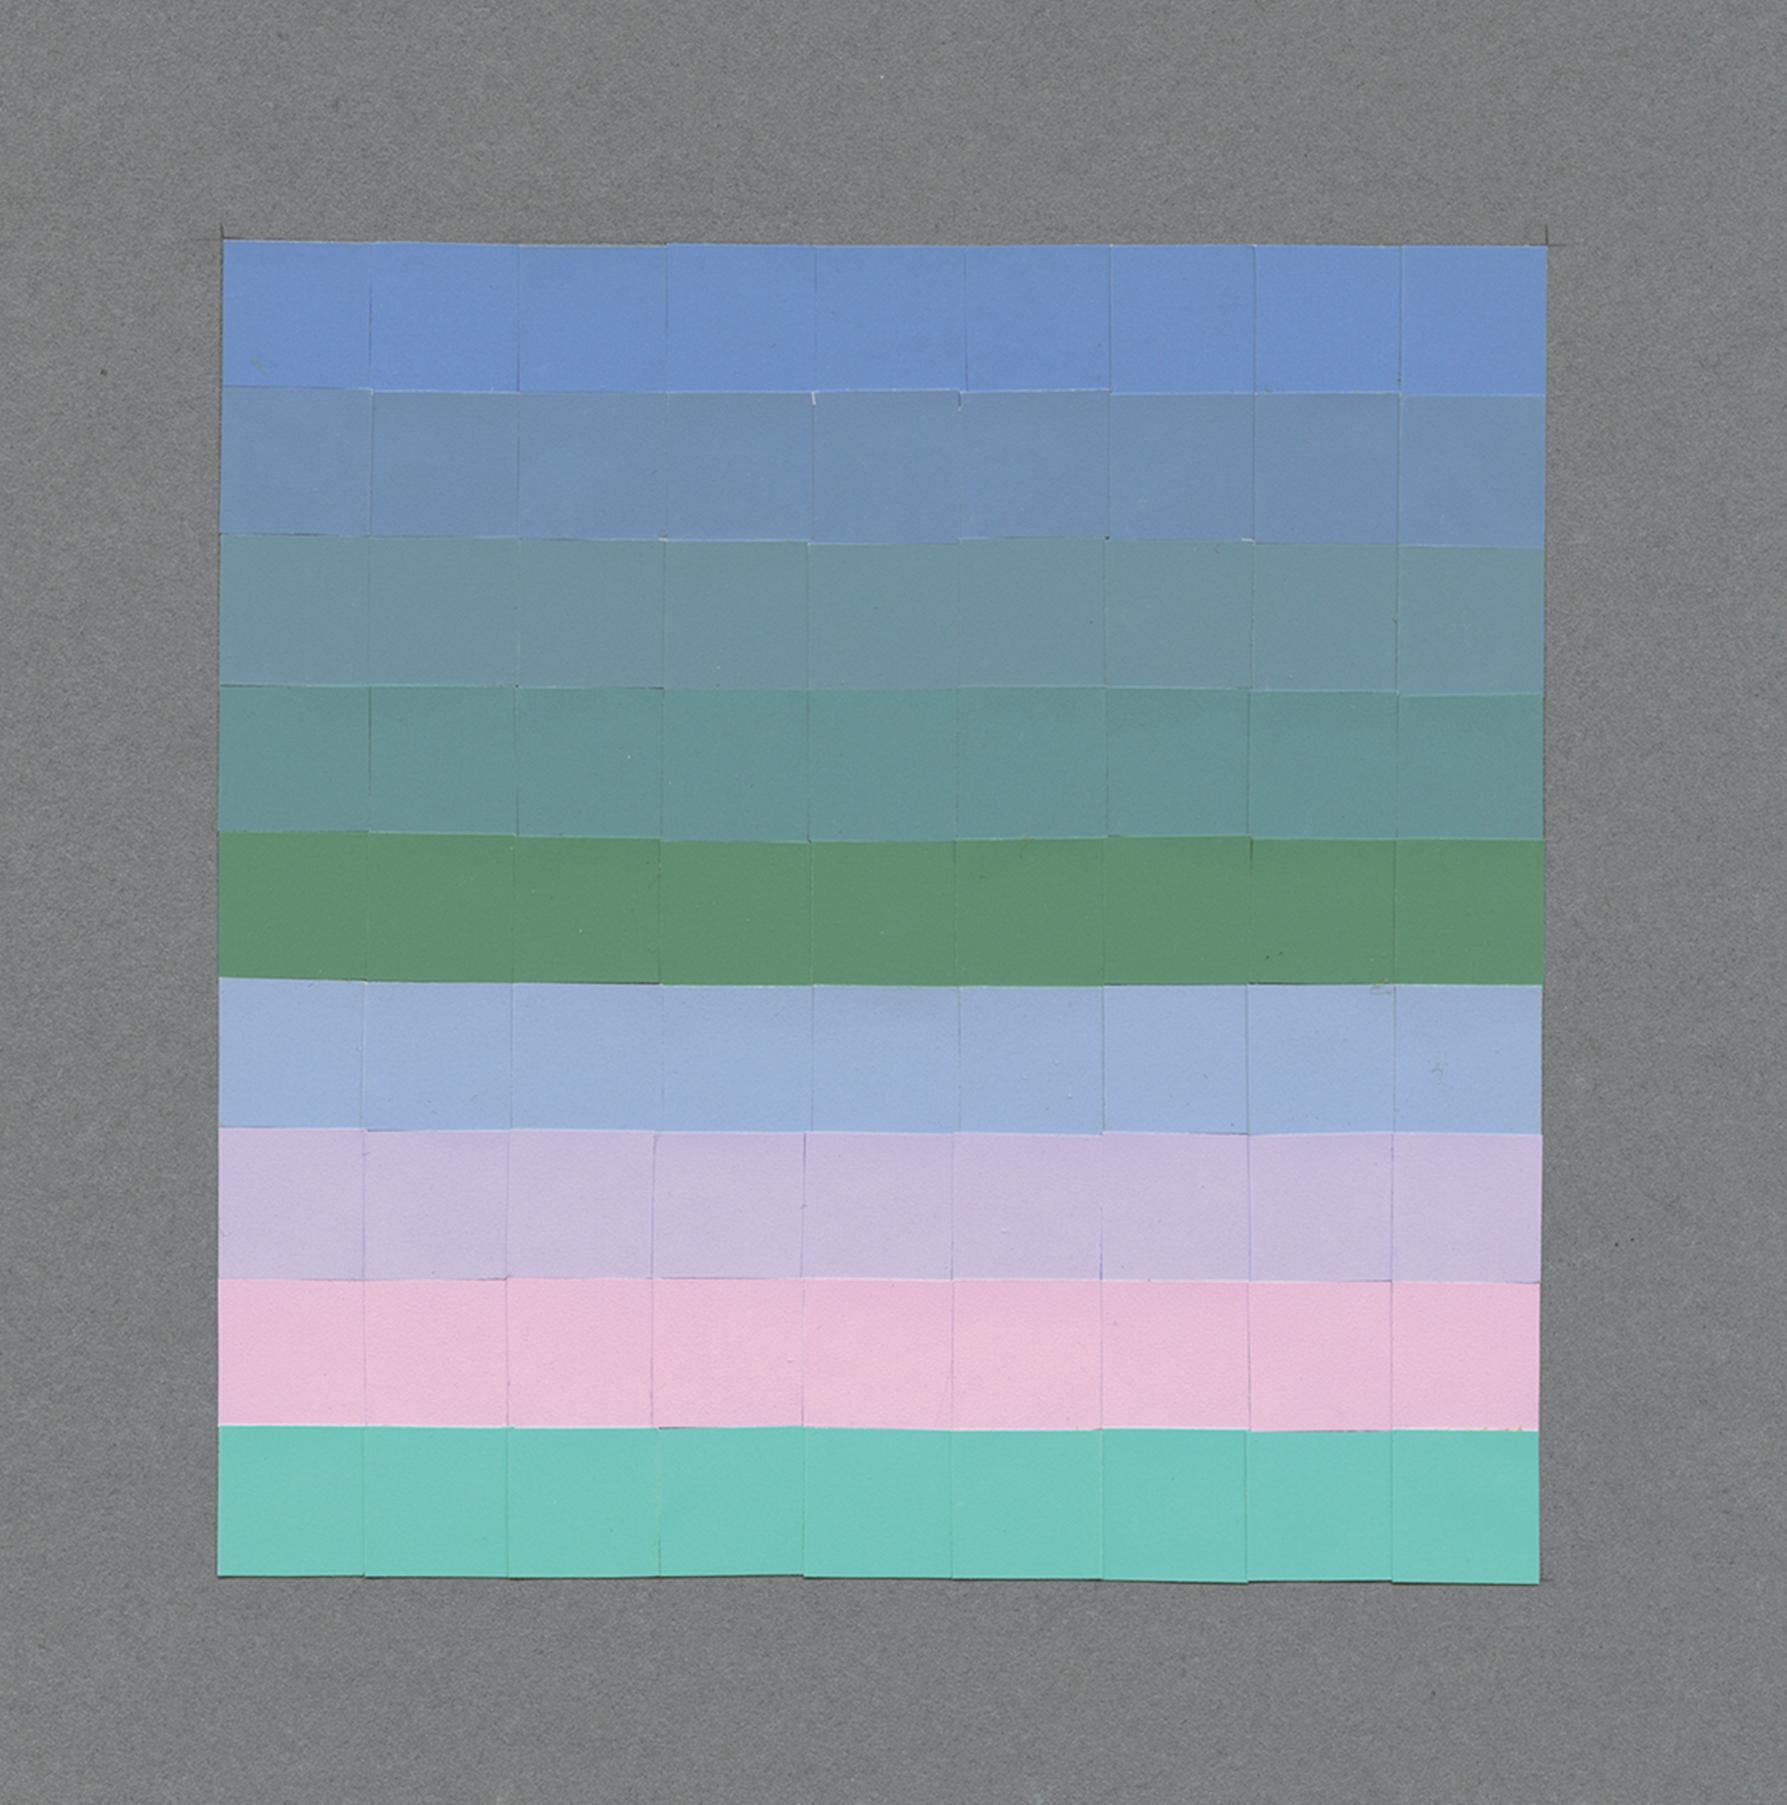 “Colors appear connected predominantly in space. Therefore, as constellations they can be seen in any direction and at any speed. And as they remain, we can return to them repeatedly and in many ways.”

― Josef Albers, Interaction of Color